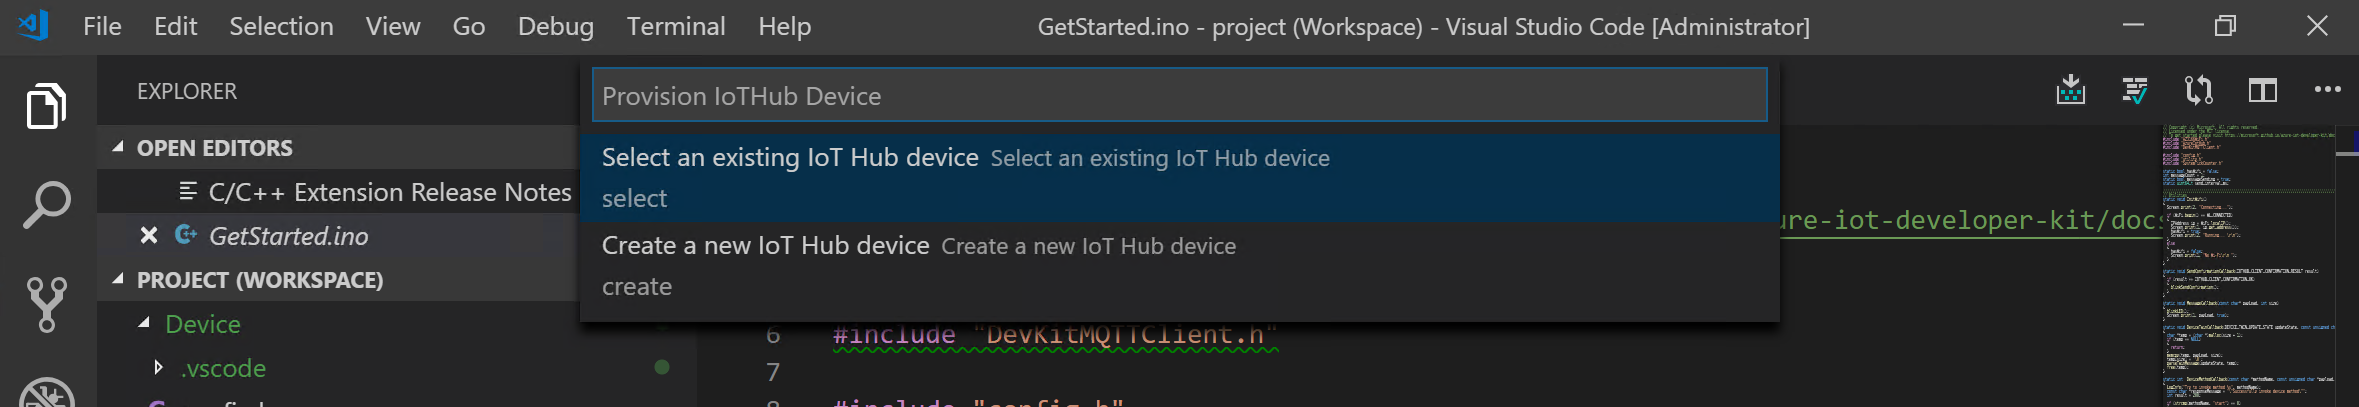 Select IoT Device steps